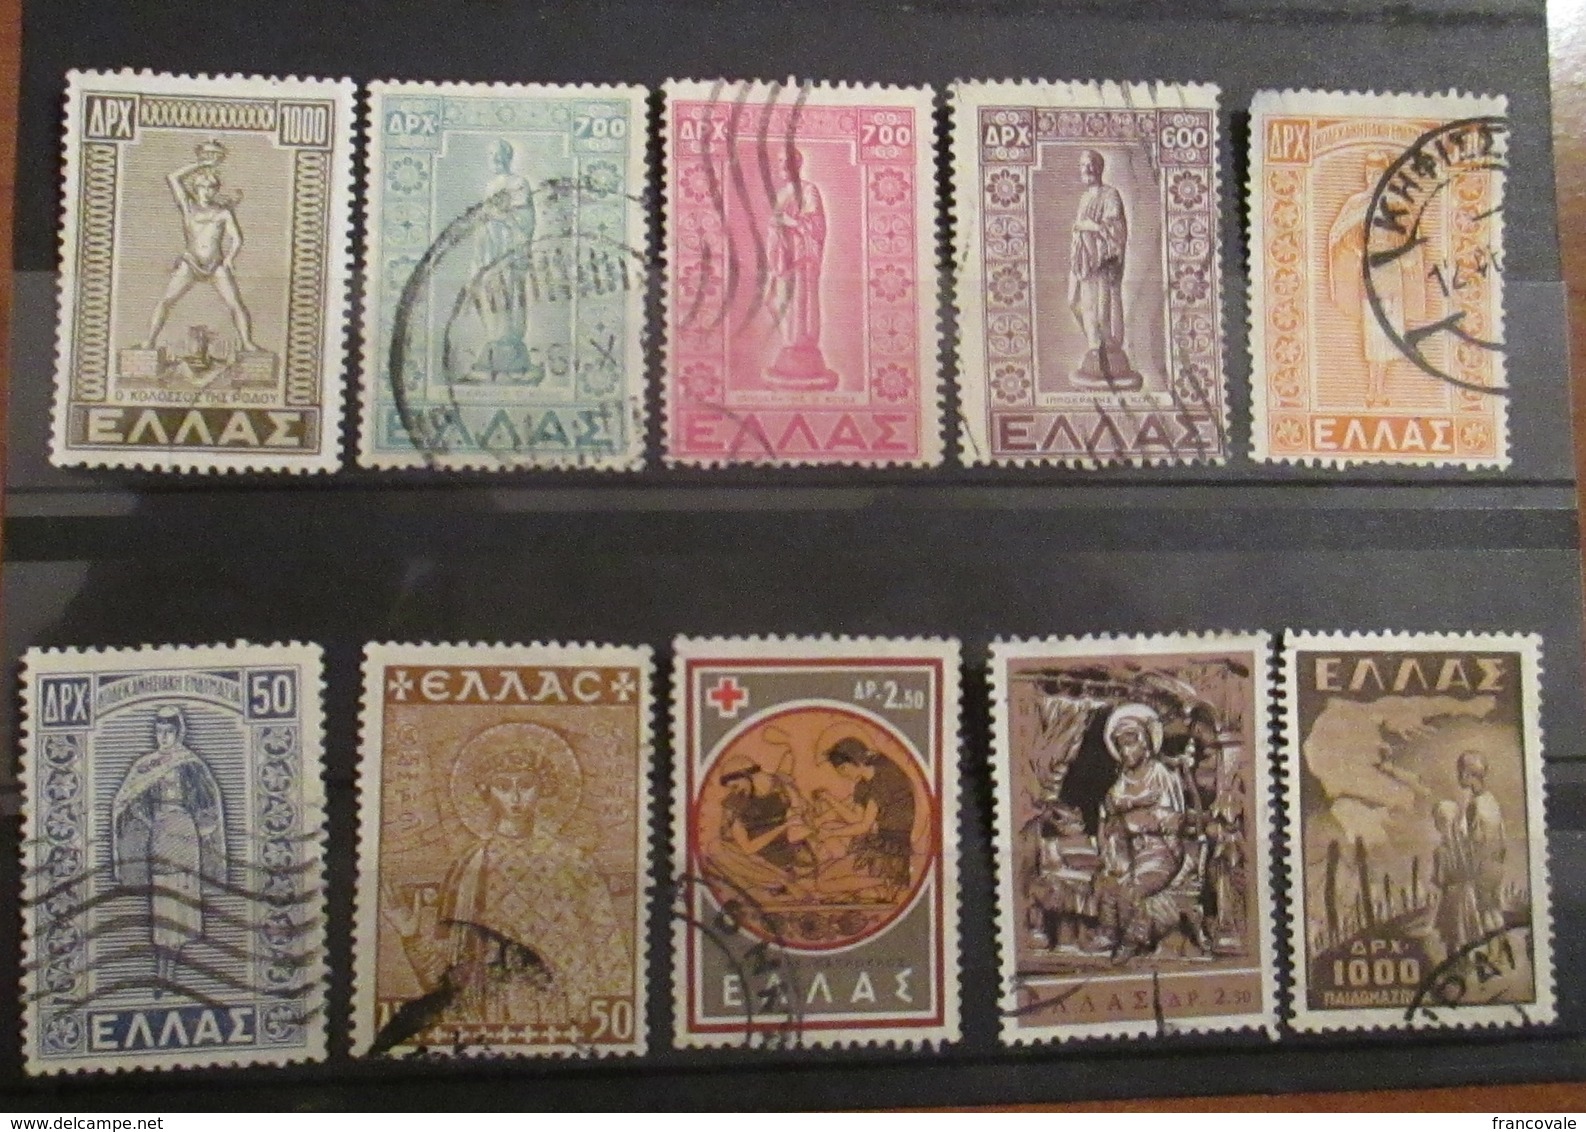 Grecia Greece 1945 - 1960 Statue Of Hippocrates And Other Stamps Used - Usati